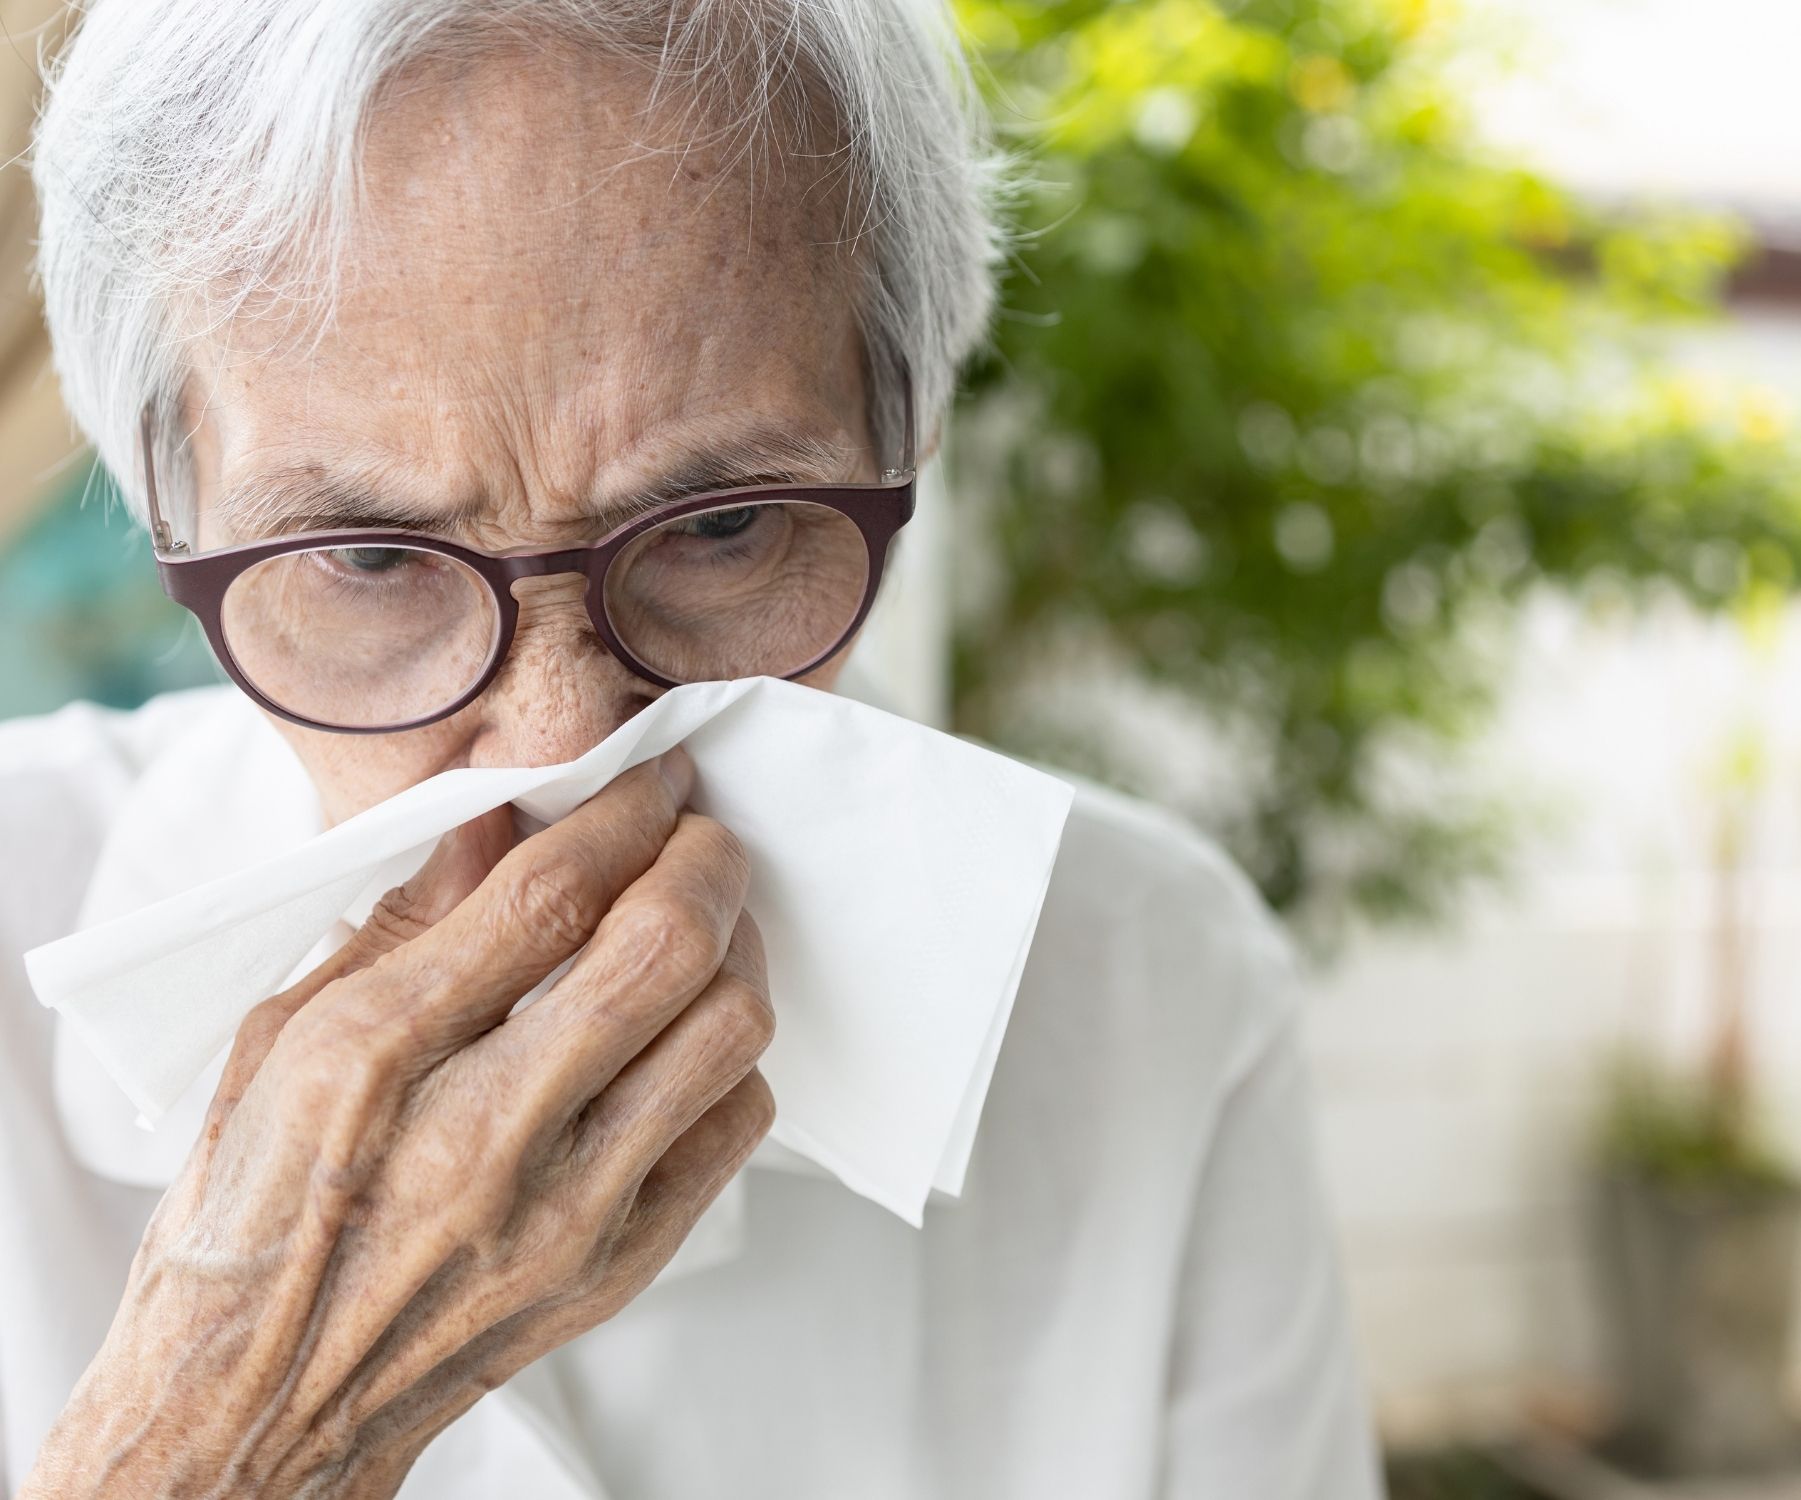 Do Air Purifiers Work for Colds? The Cold Hard Truth